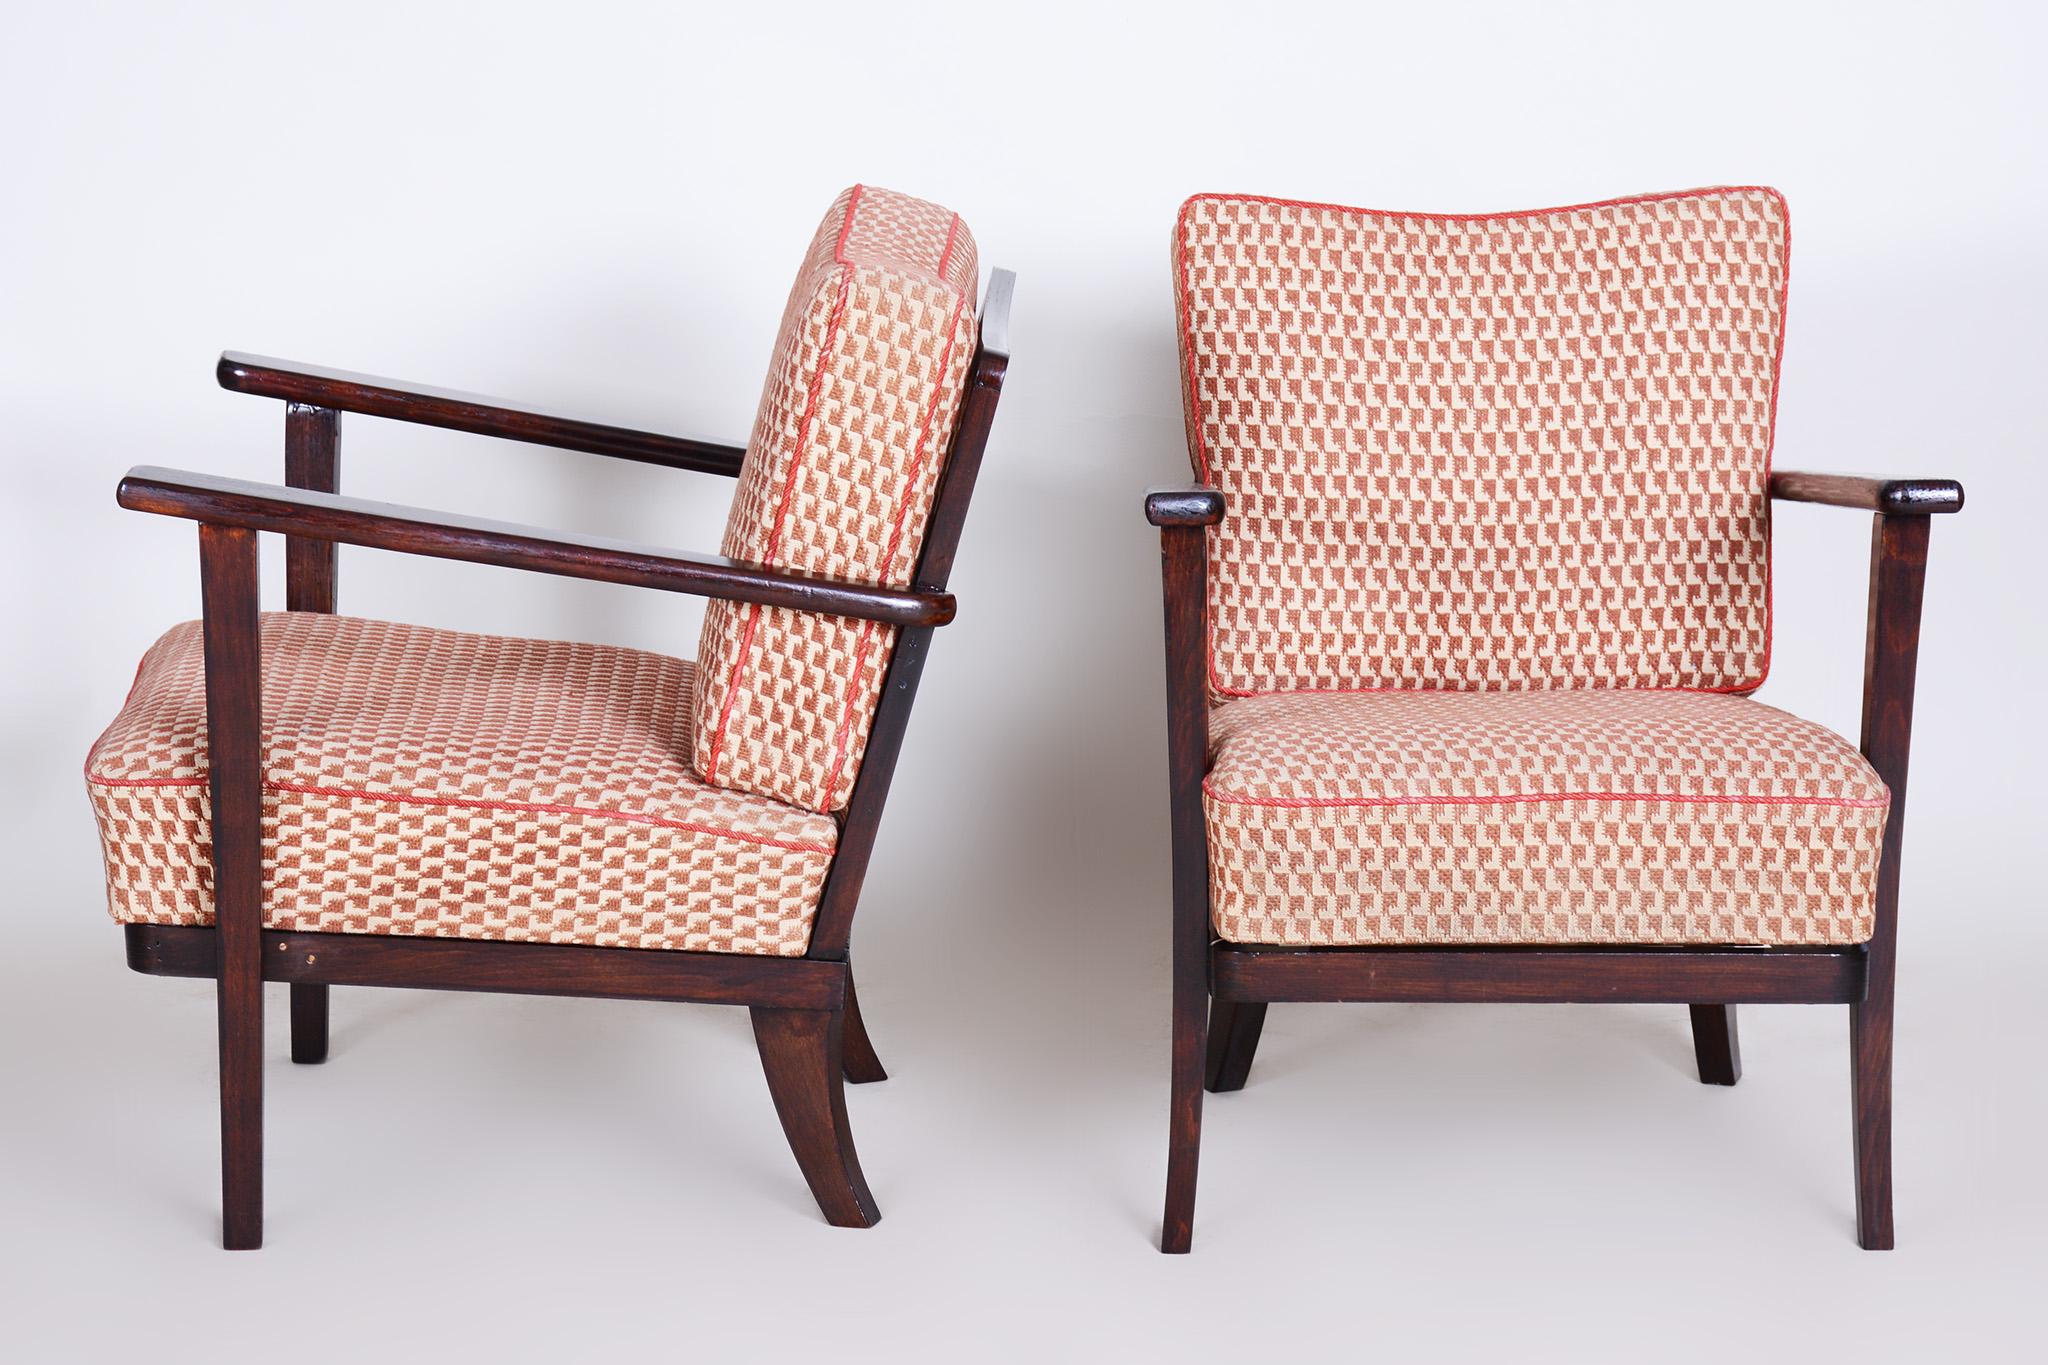 Czech Pair of Art Deco Armchairs Made in the 1930s, Non Restored, Original Beech For Sale